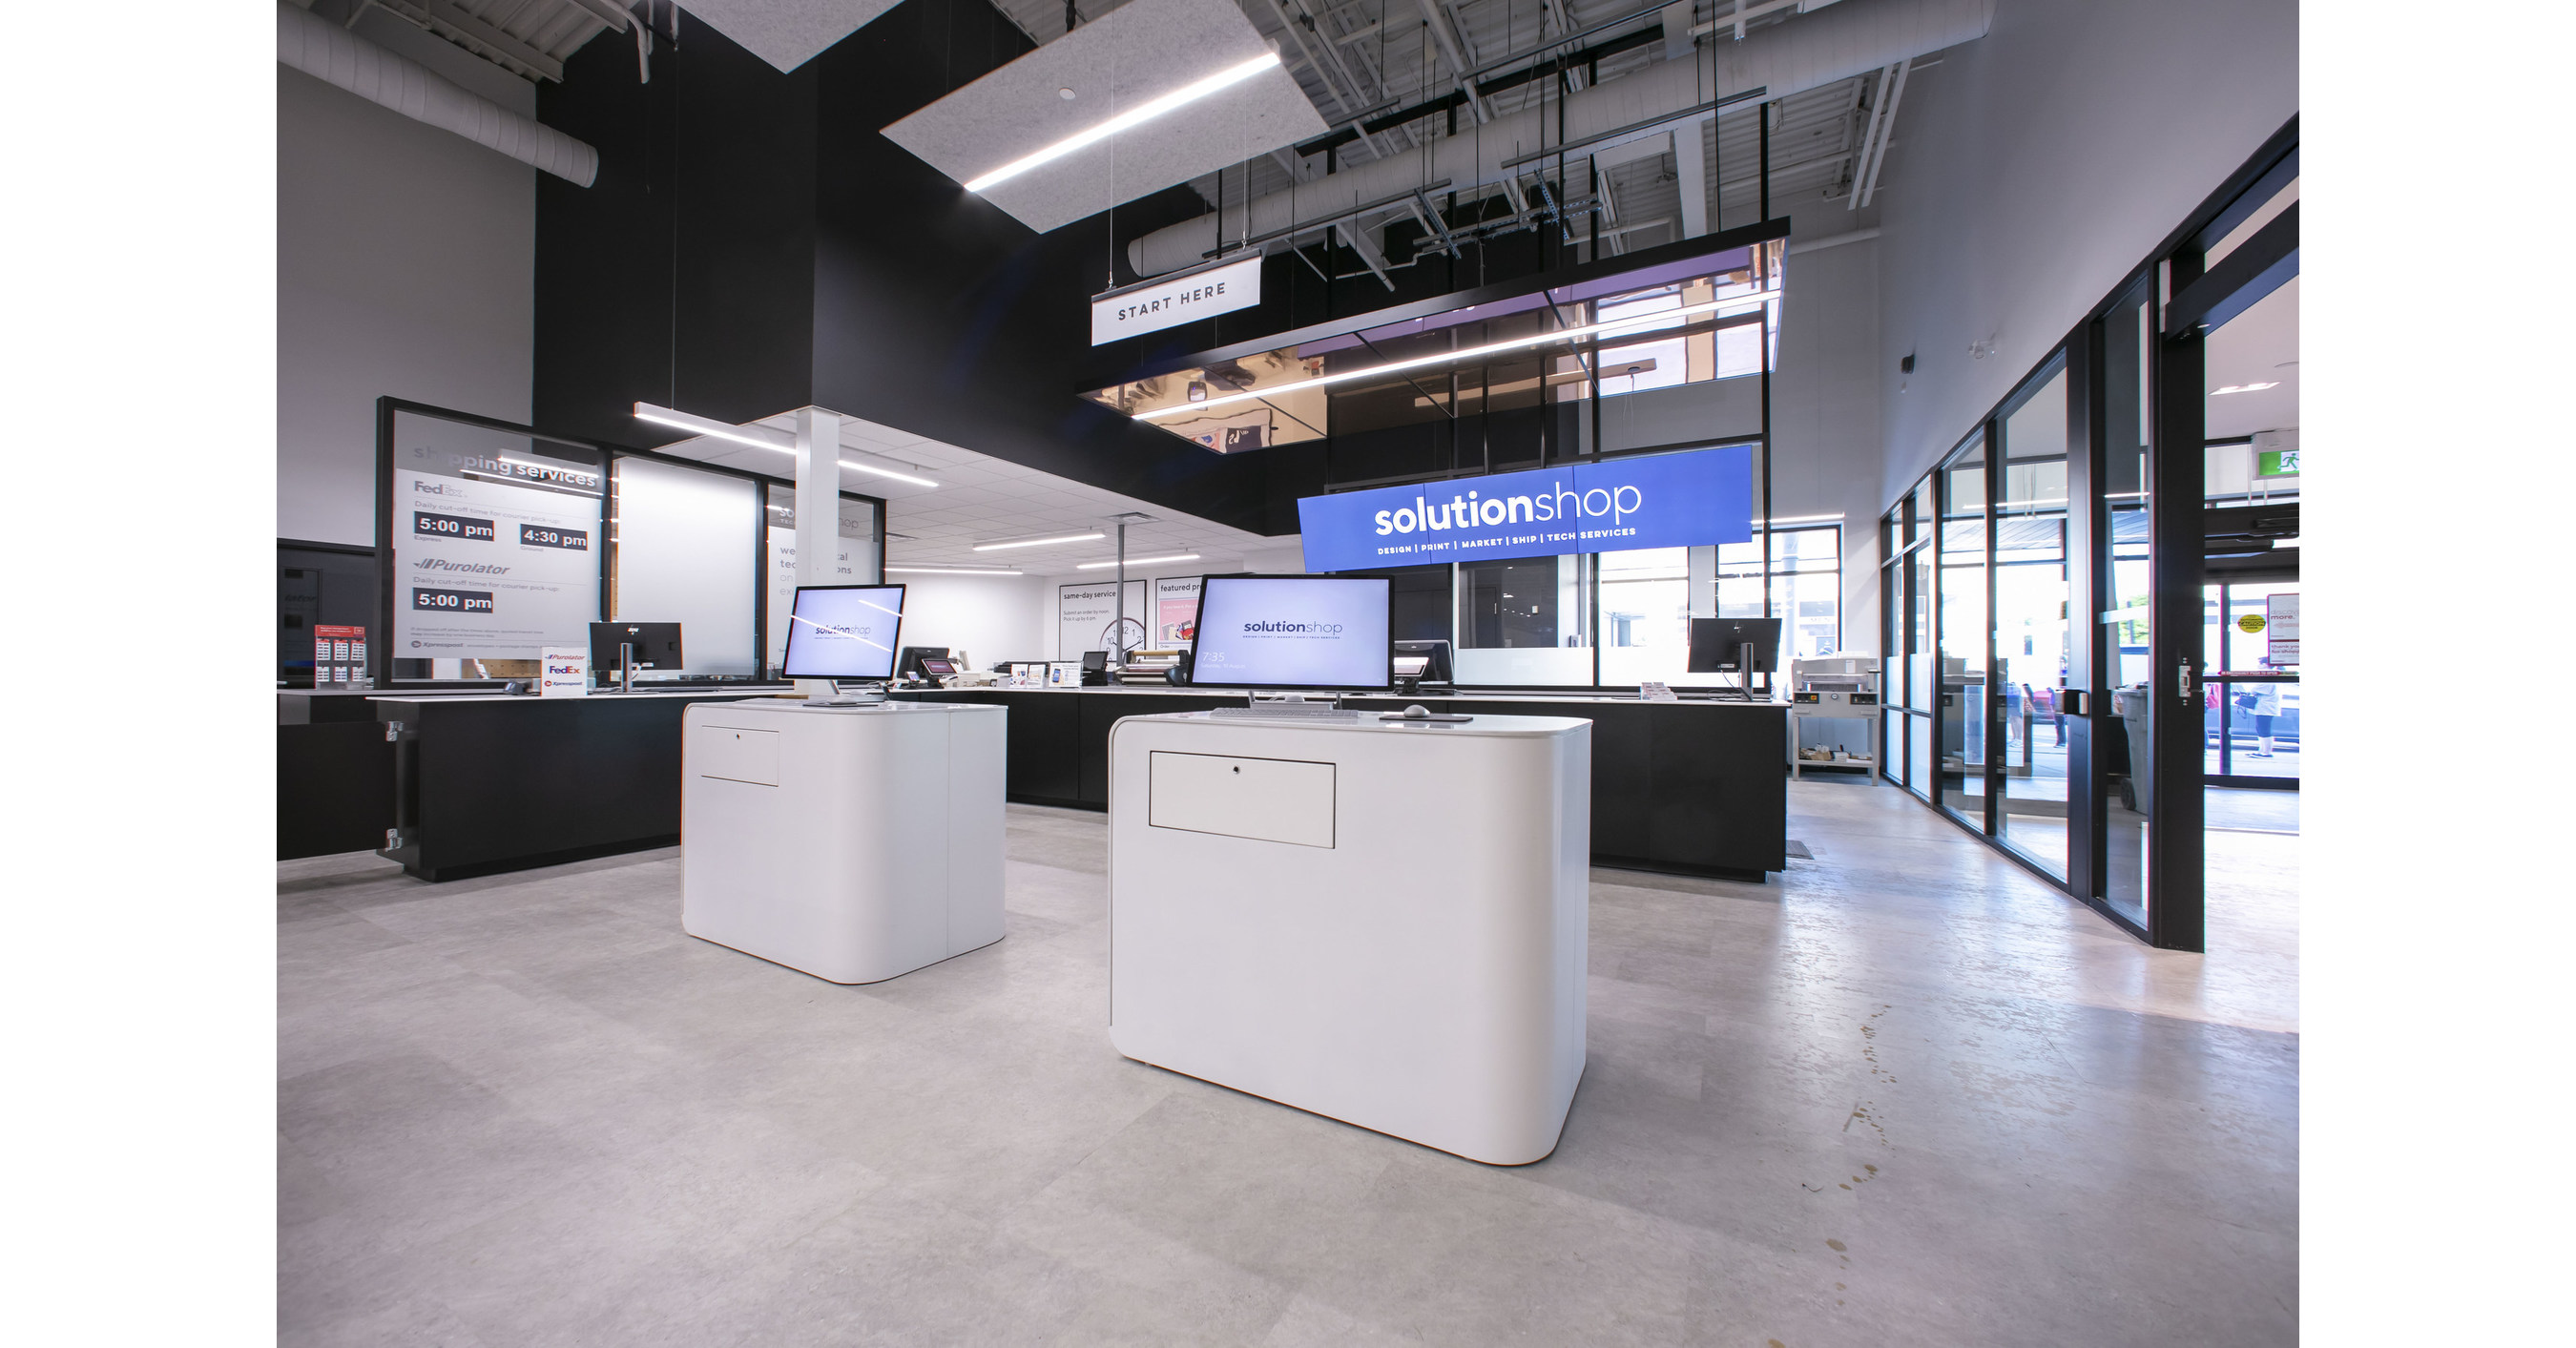 Staples Canada on X: Staples Canada, The Working and Learning Company, has  transformed its print and tech services business. Solutionshop is taking  services to the next level by offering customers a complete